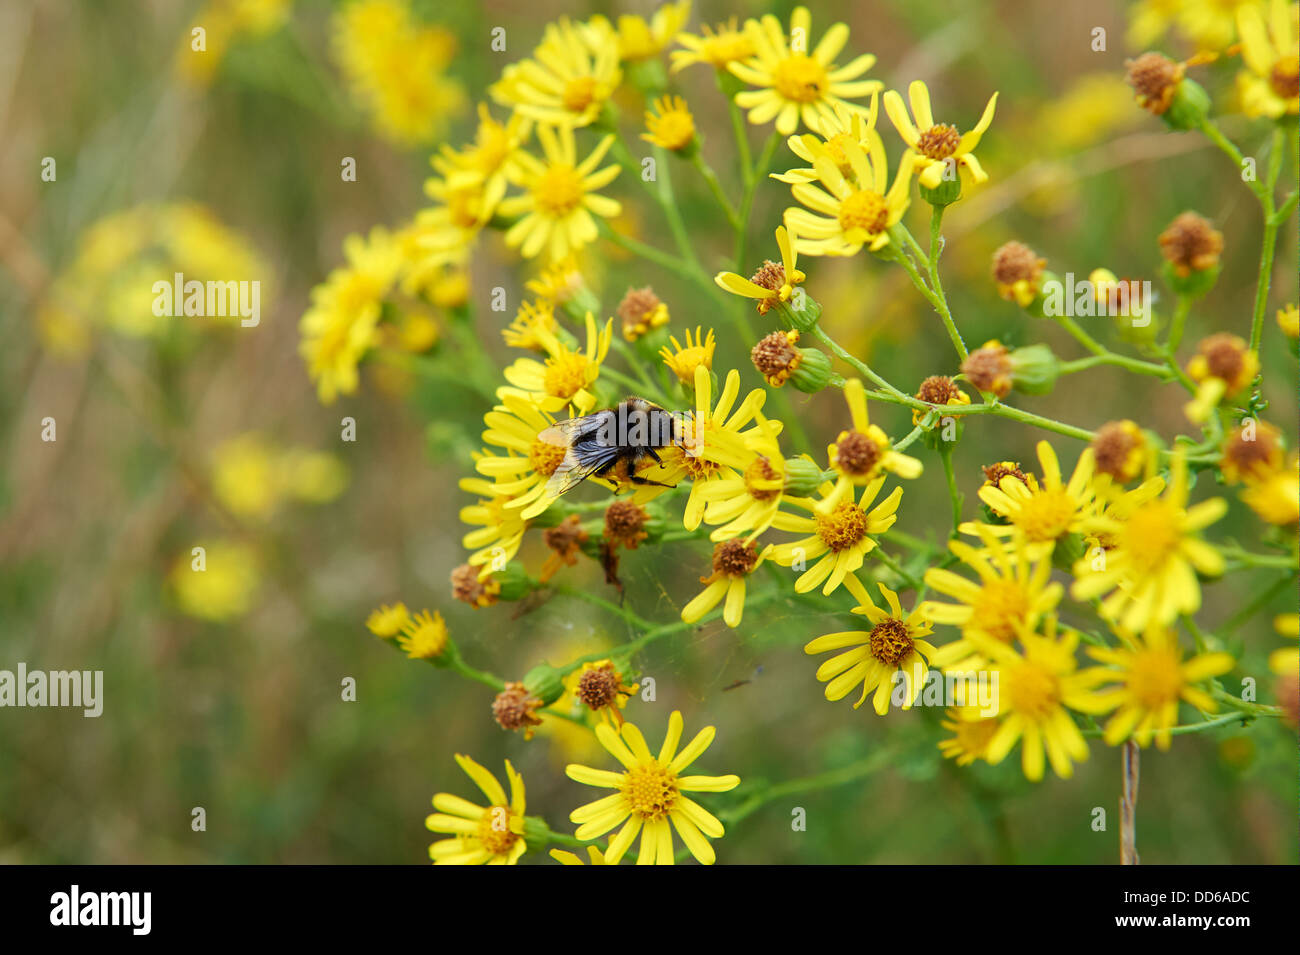 Buff-Tailed Bumble Bee, Bombus terrestris, Collecting Pollen from Ragwort on Conservation Farm Land. England, UK, 2013 Stock Photo